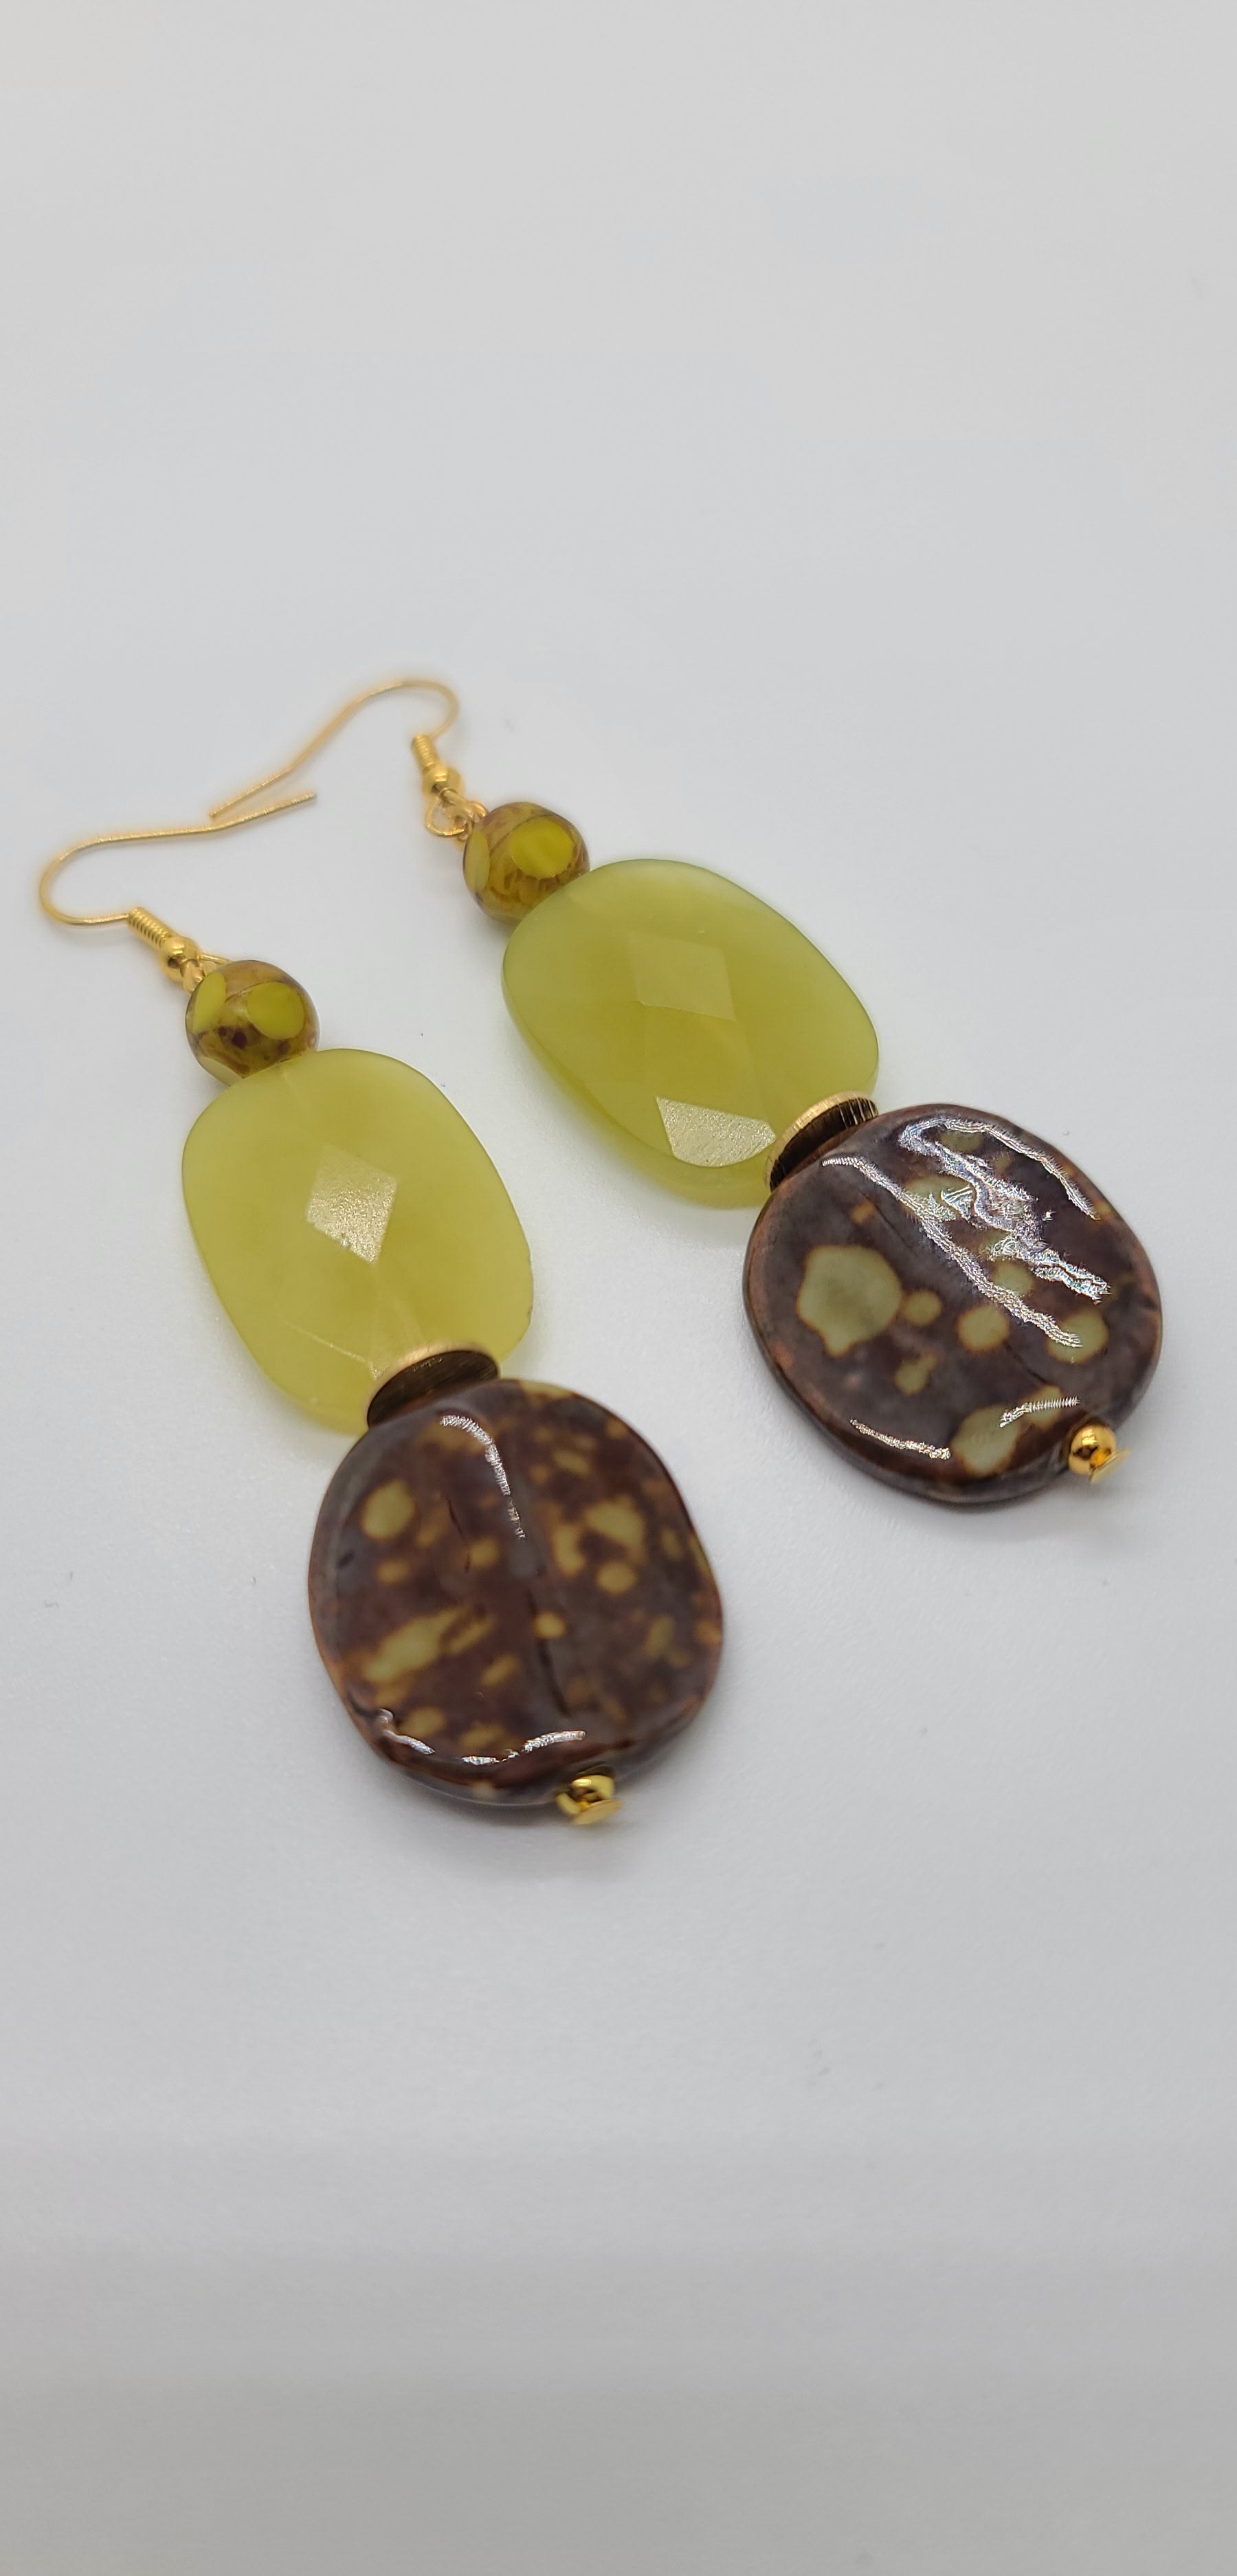 Length: 3 inches | Weight: 0.7 ounces  Distinctly You! These earrings are made with brown and gold print ceramic stones, citron green glass faceted stones, 8mm brown and green matte colored faceted glass beads, gold seed beads, and gold rondelles.